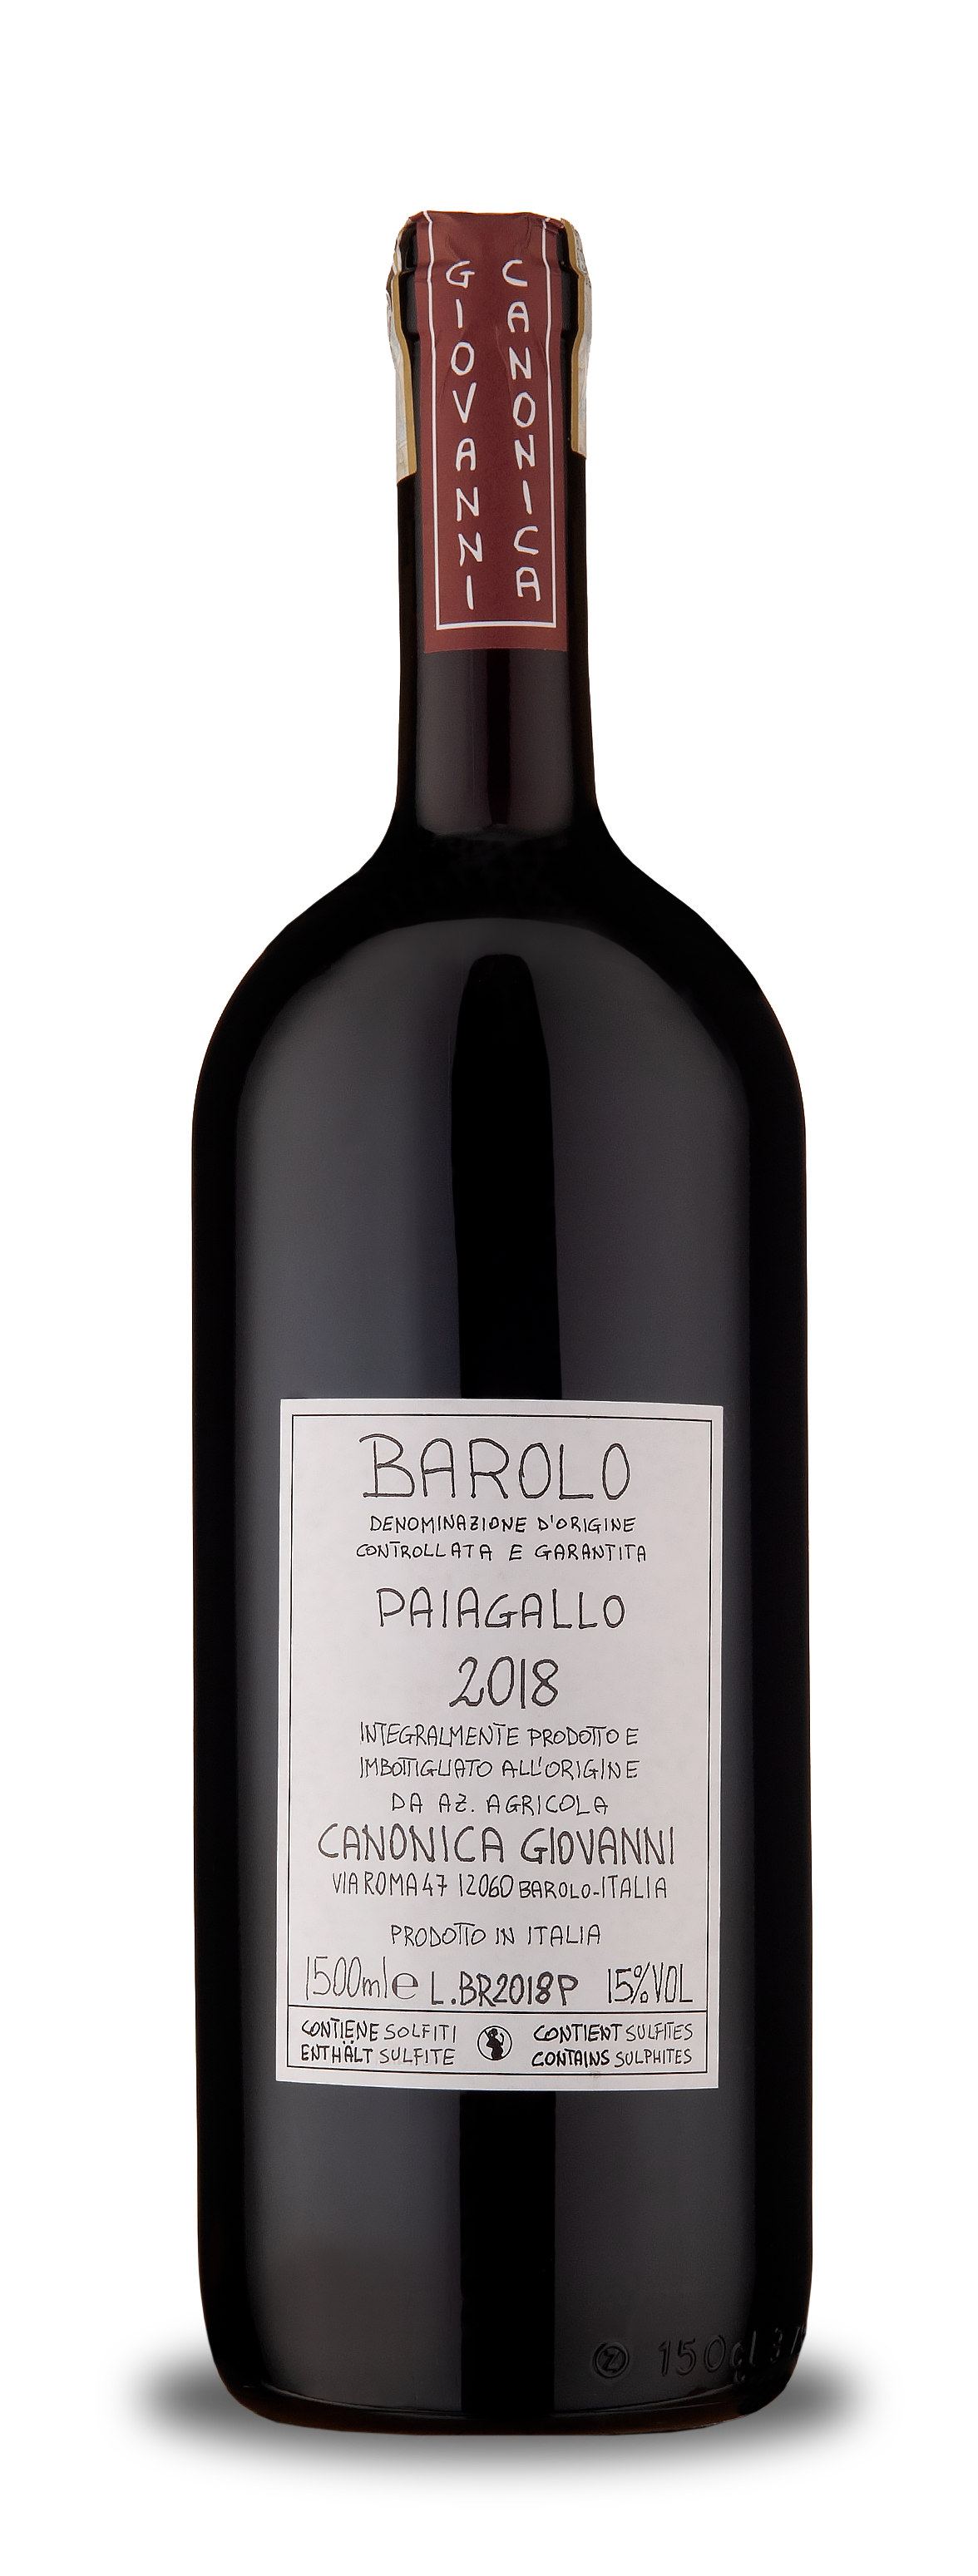 Barolo Paiagallo 2018 1,5l - ONLY ON PRE-ALLOCATION Contact us for further information (indulge@flemmings.wine)